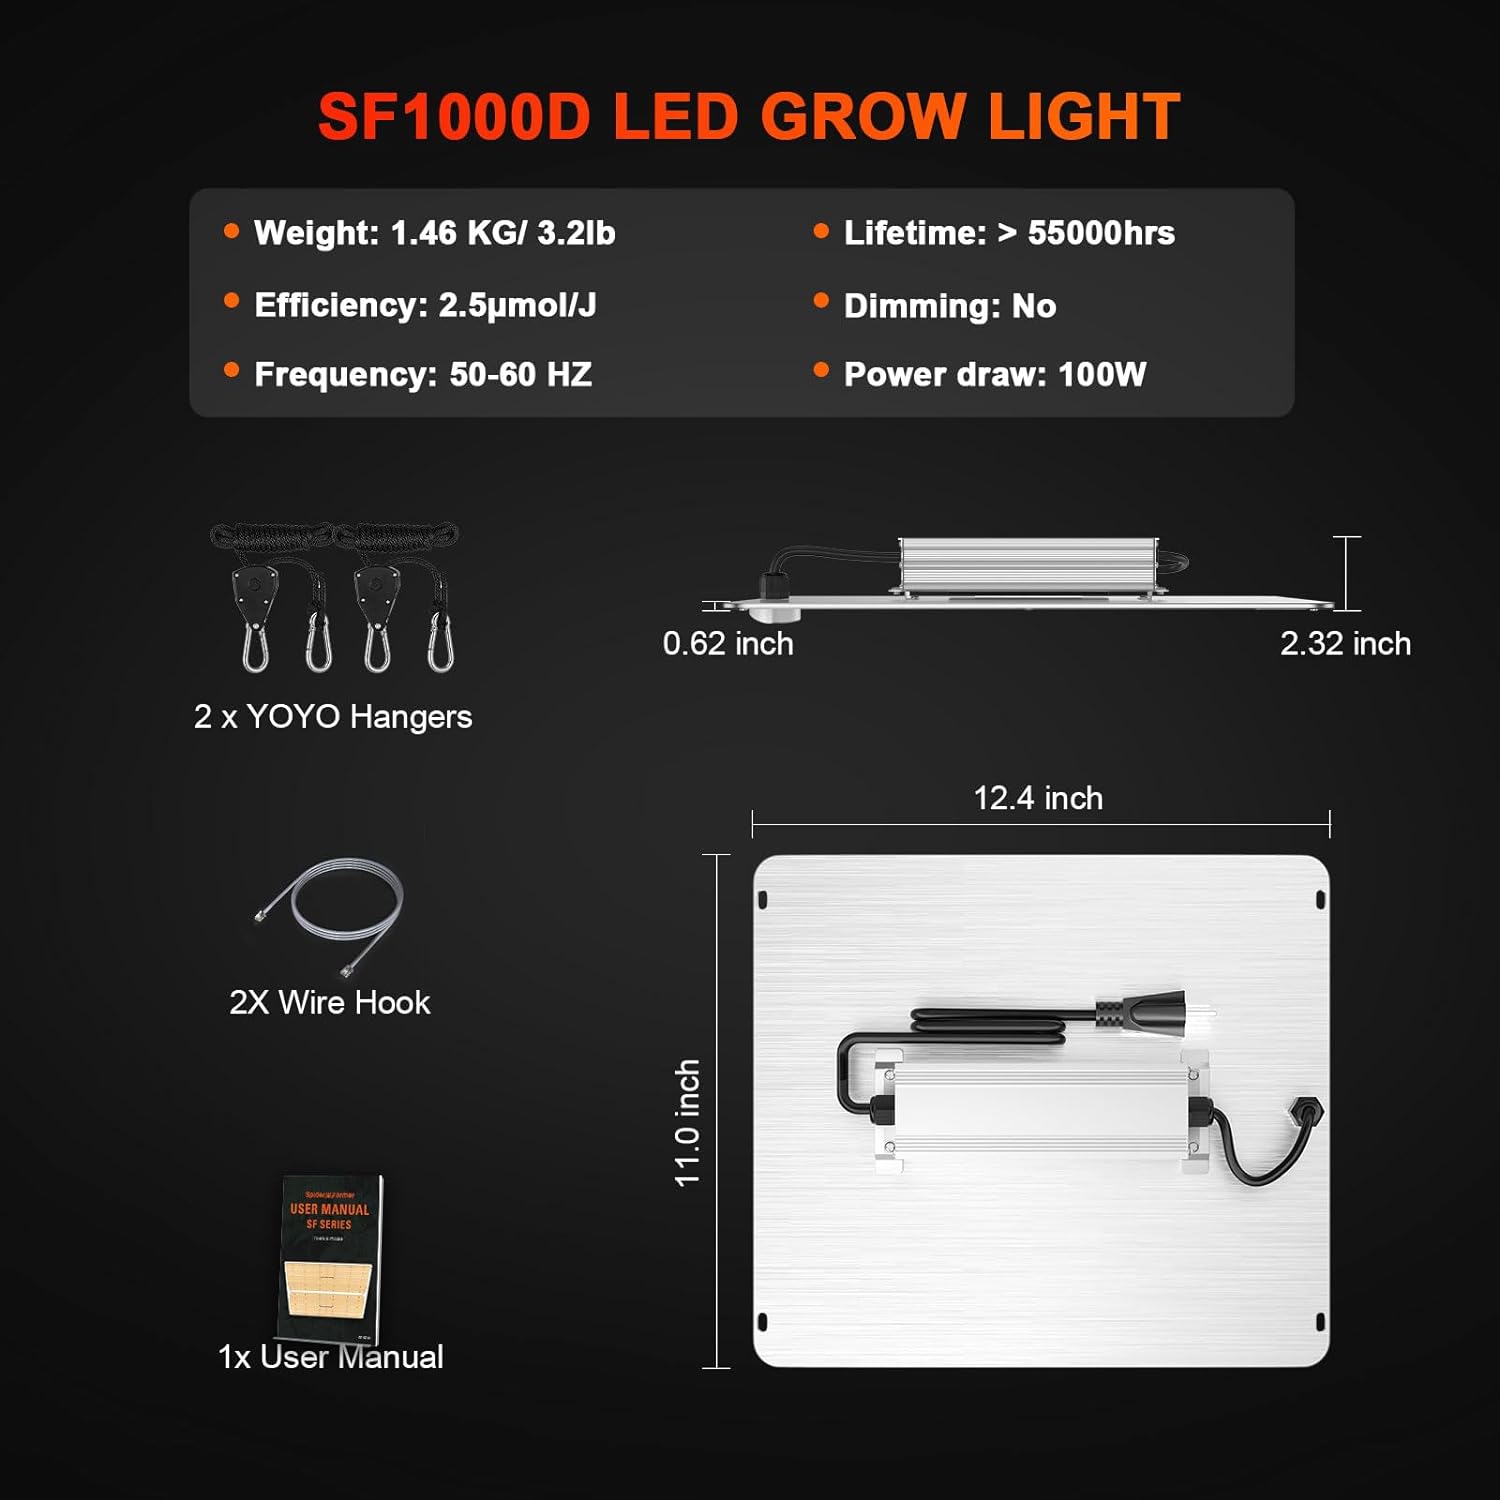 Spider Farmer 2024 New SF1000D LED Grow Light with Samsung LM301B Diodes Deeper Penetration  IR Lights Full Spectrum Growing Lamps for Indoor Plants Seedlings Vegetables Flowers 3x3/2x2 Grow Tent